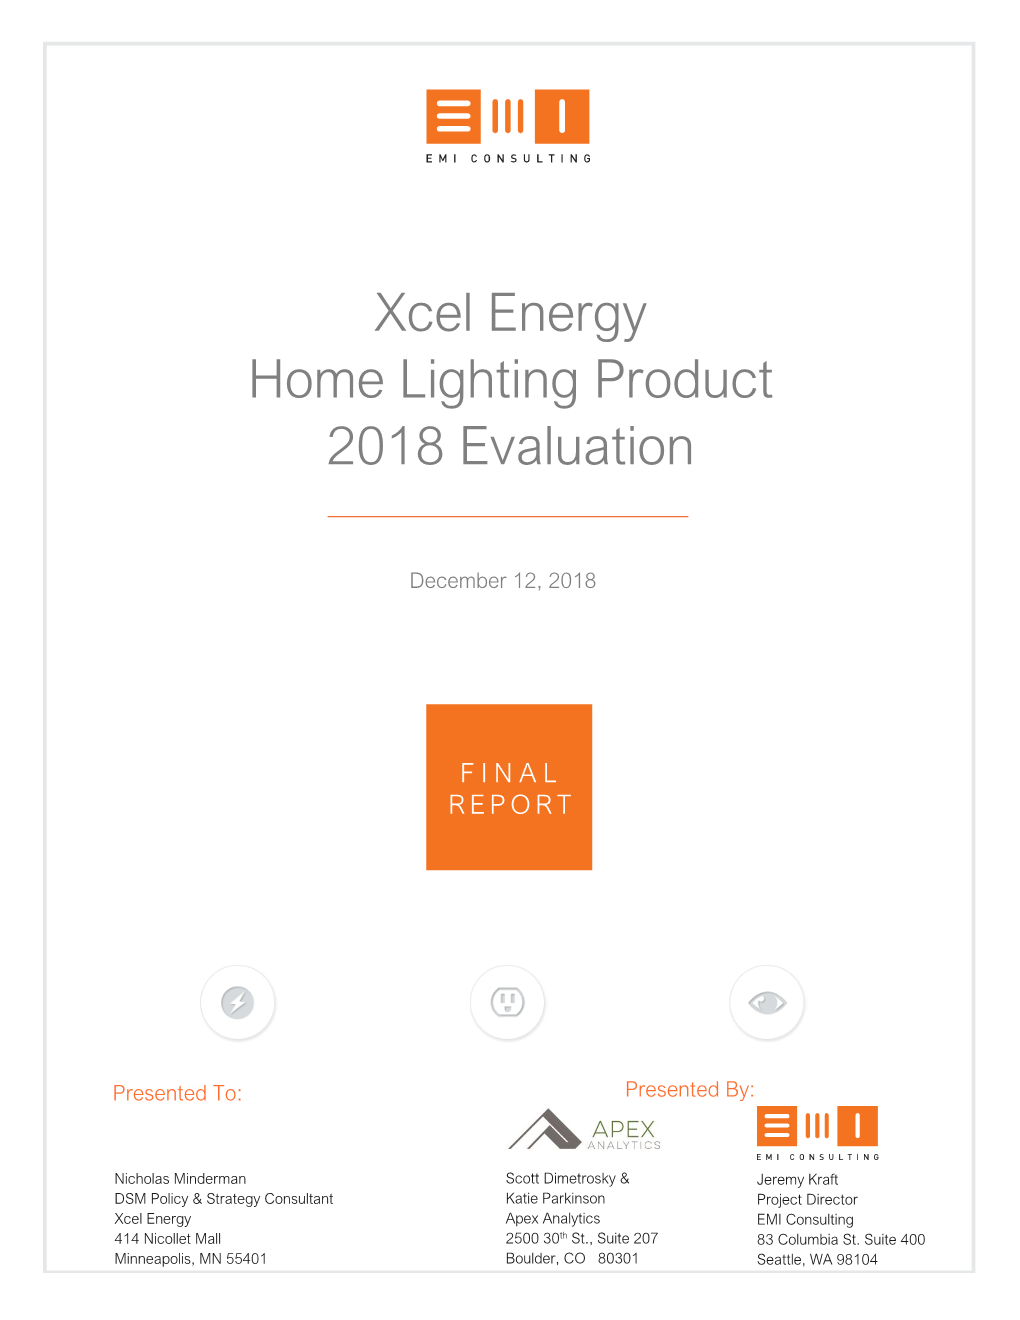 Xcel Energy Home Lighting Product 2018 Evaluation